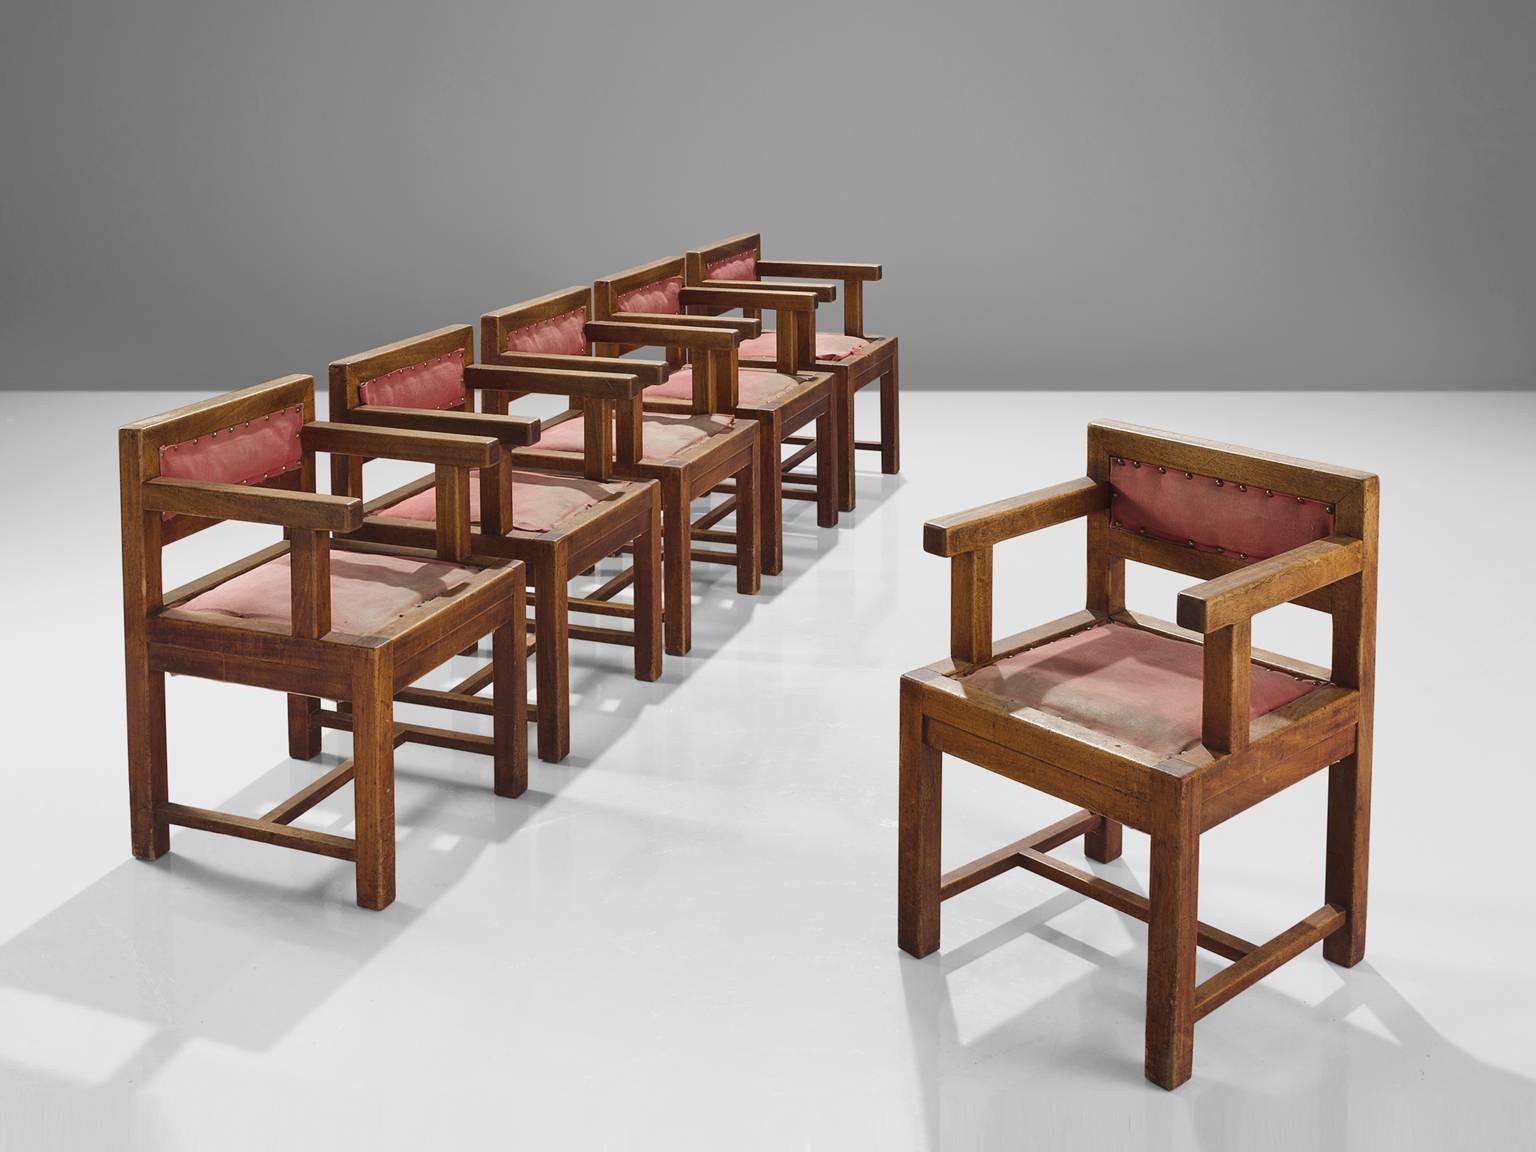 Set of six armchairs, in mahogany and red to pink fabric, France, 1930s.

This set of six solid dining chairs in mahogany with red fabric upholstery have a clear design of straight lines and have a stately appearance. No diagonals or curves, just